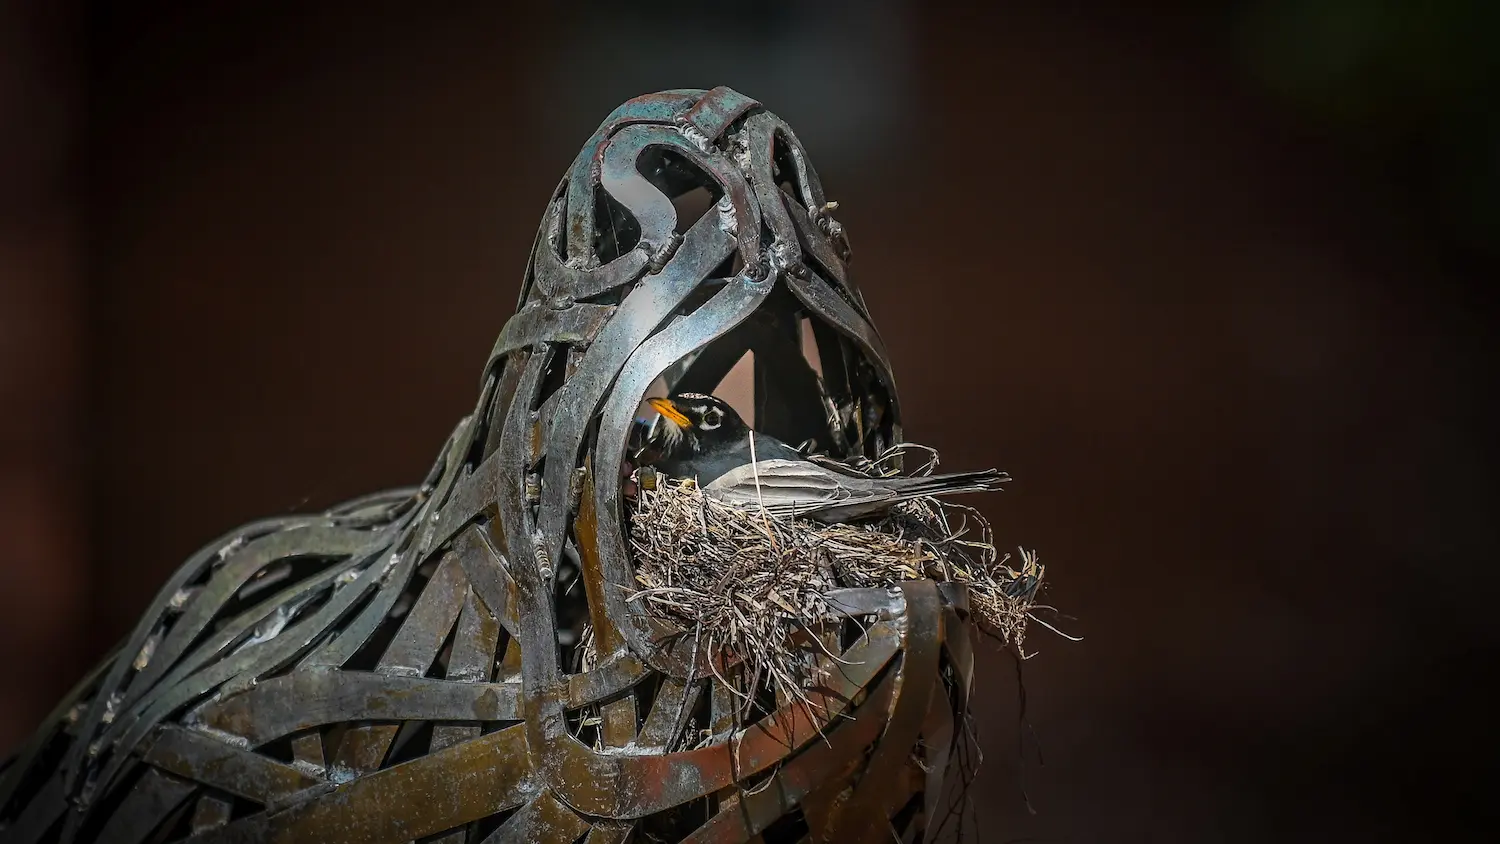 A bird sits in its nest, built in the mouth of a copper wolf statue on campus.